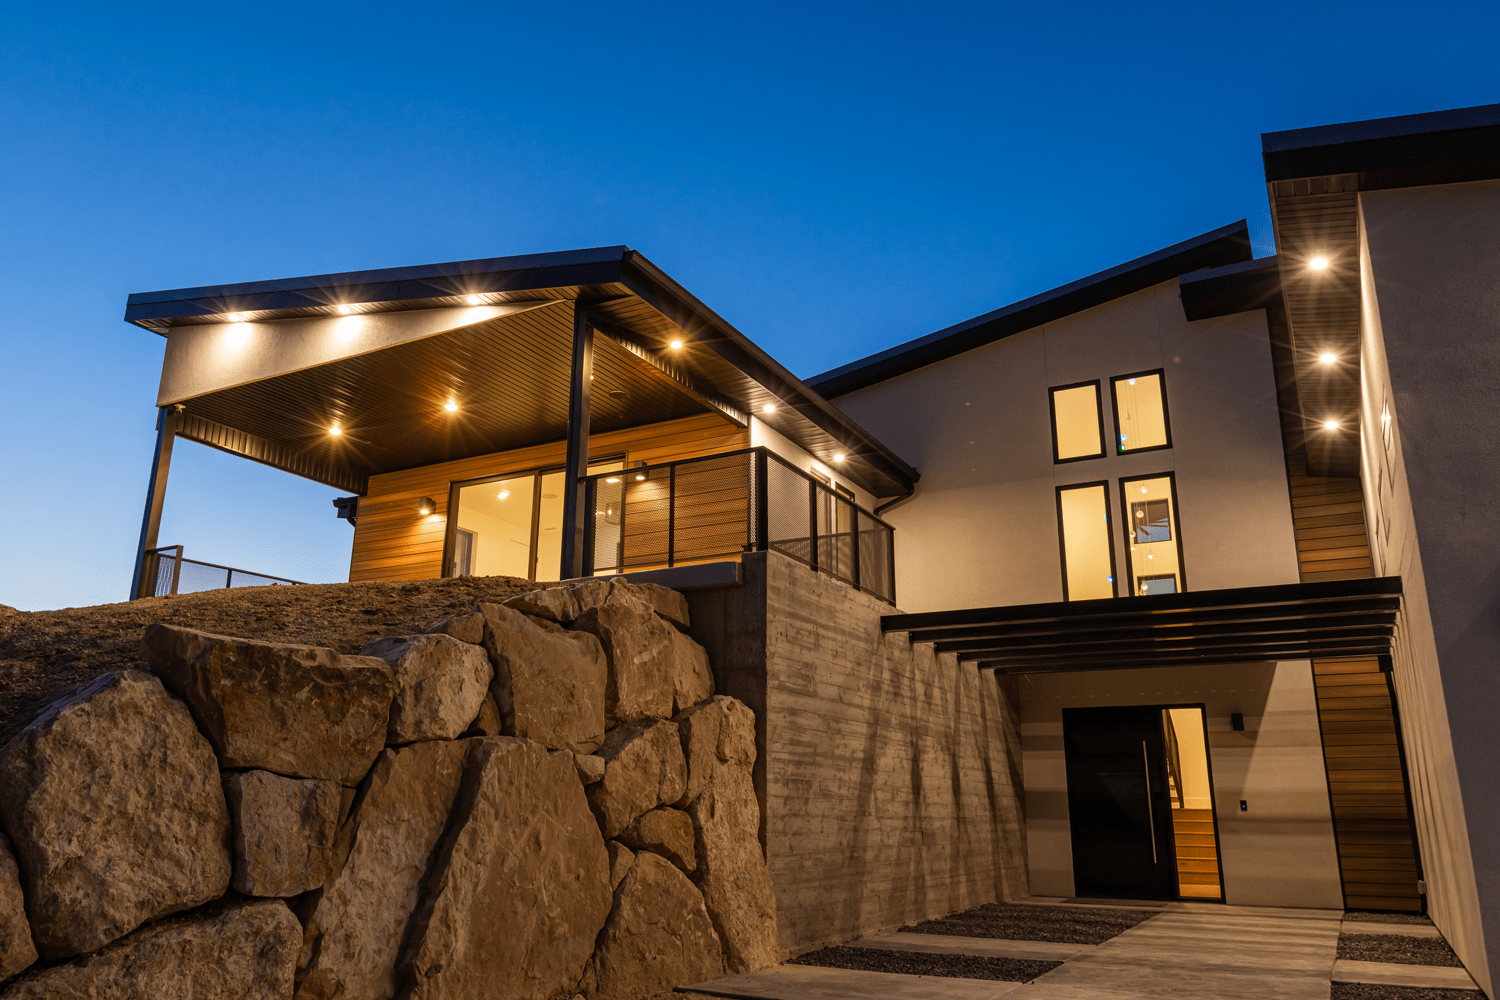 Custom built home with mountain views and modern style for Cedar City Parade of Homes